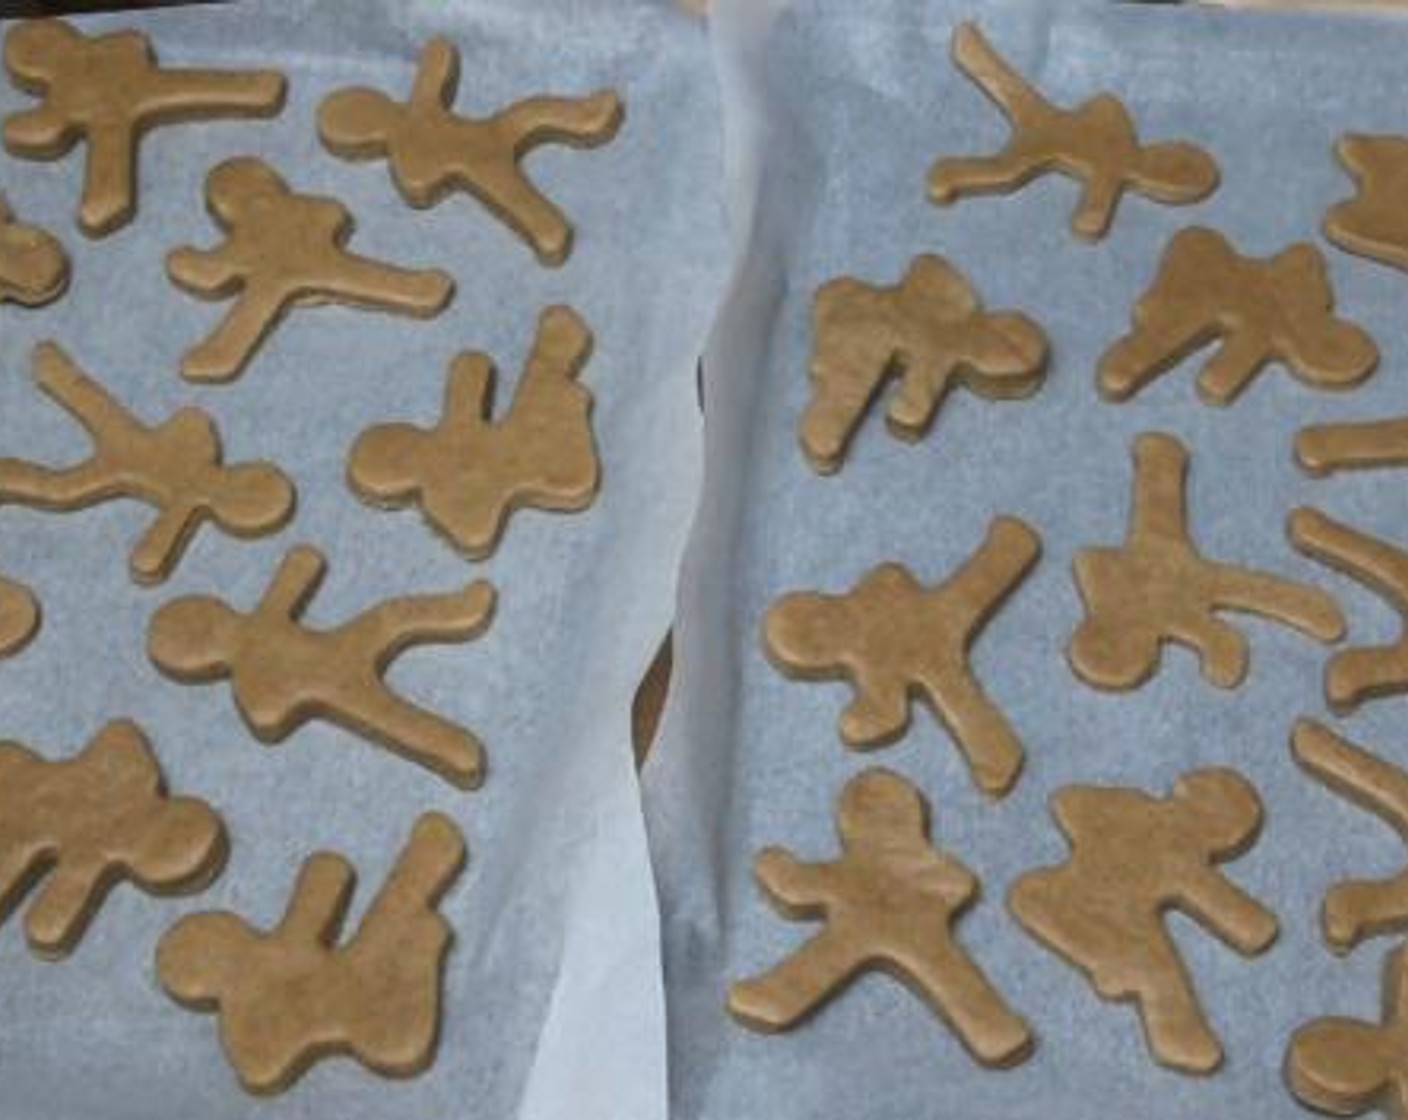 step 5 Using cookie cutters, cut the dough into small cookies. Bake inside a preheated oven under 180 degrees C (350 degrees F), for about 25 minutes.